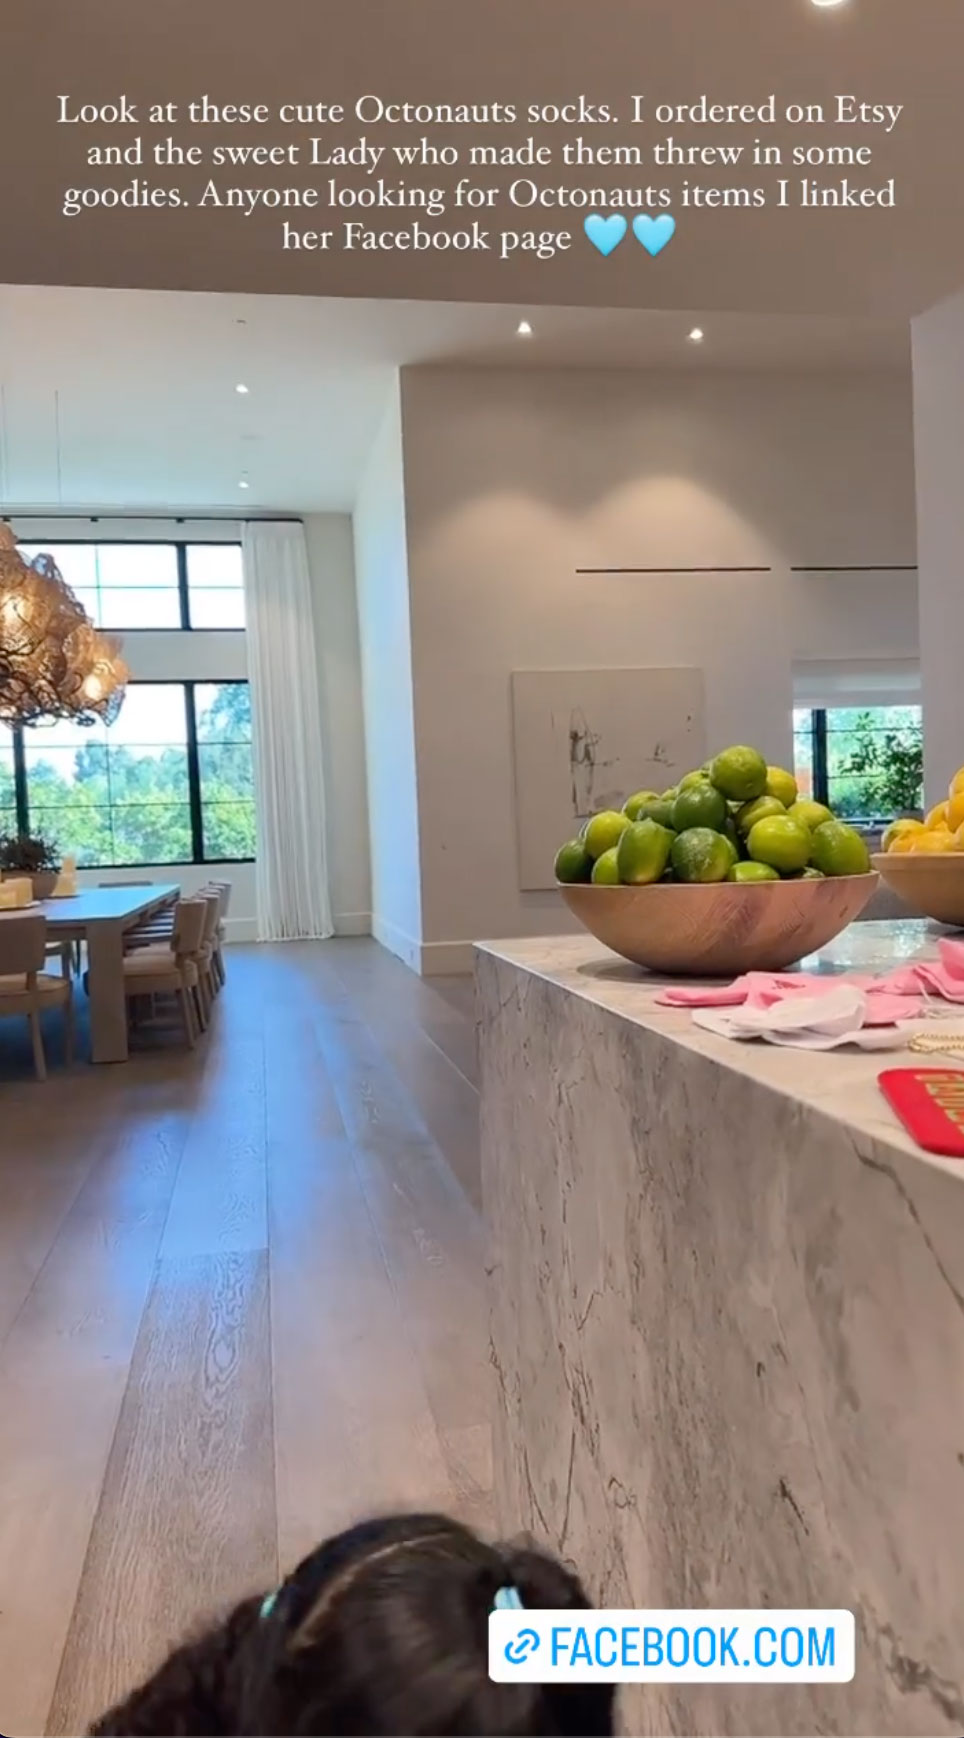 She previously showed off her pricey kitchen